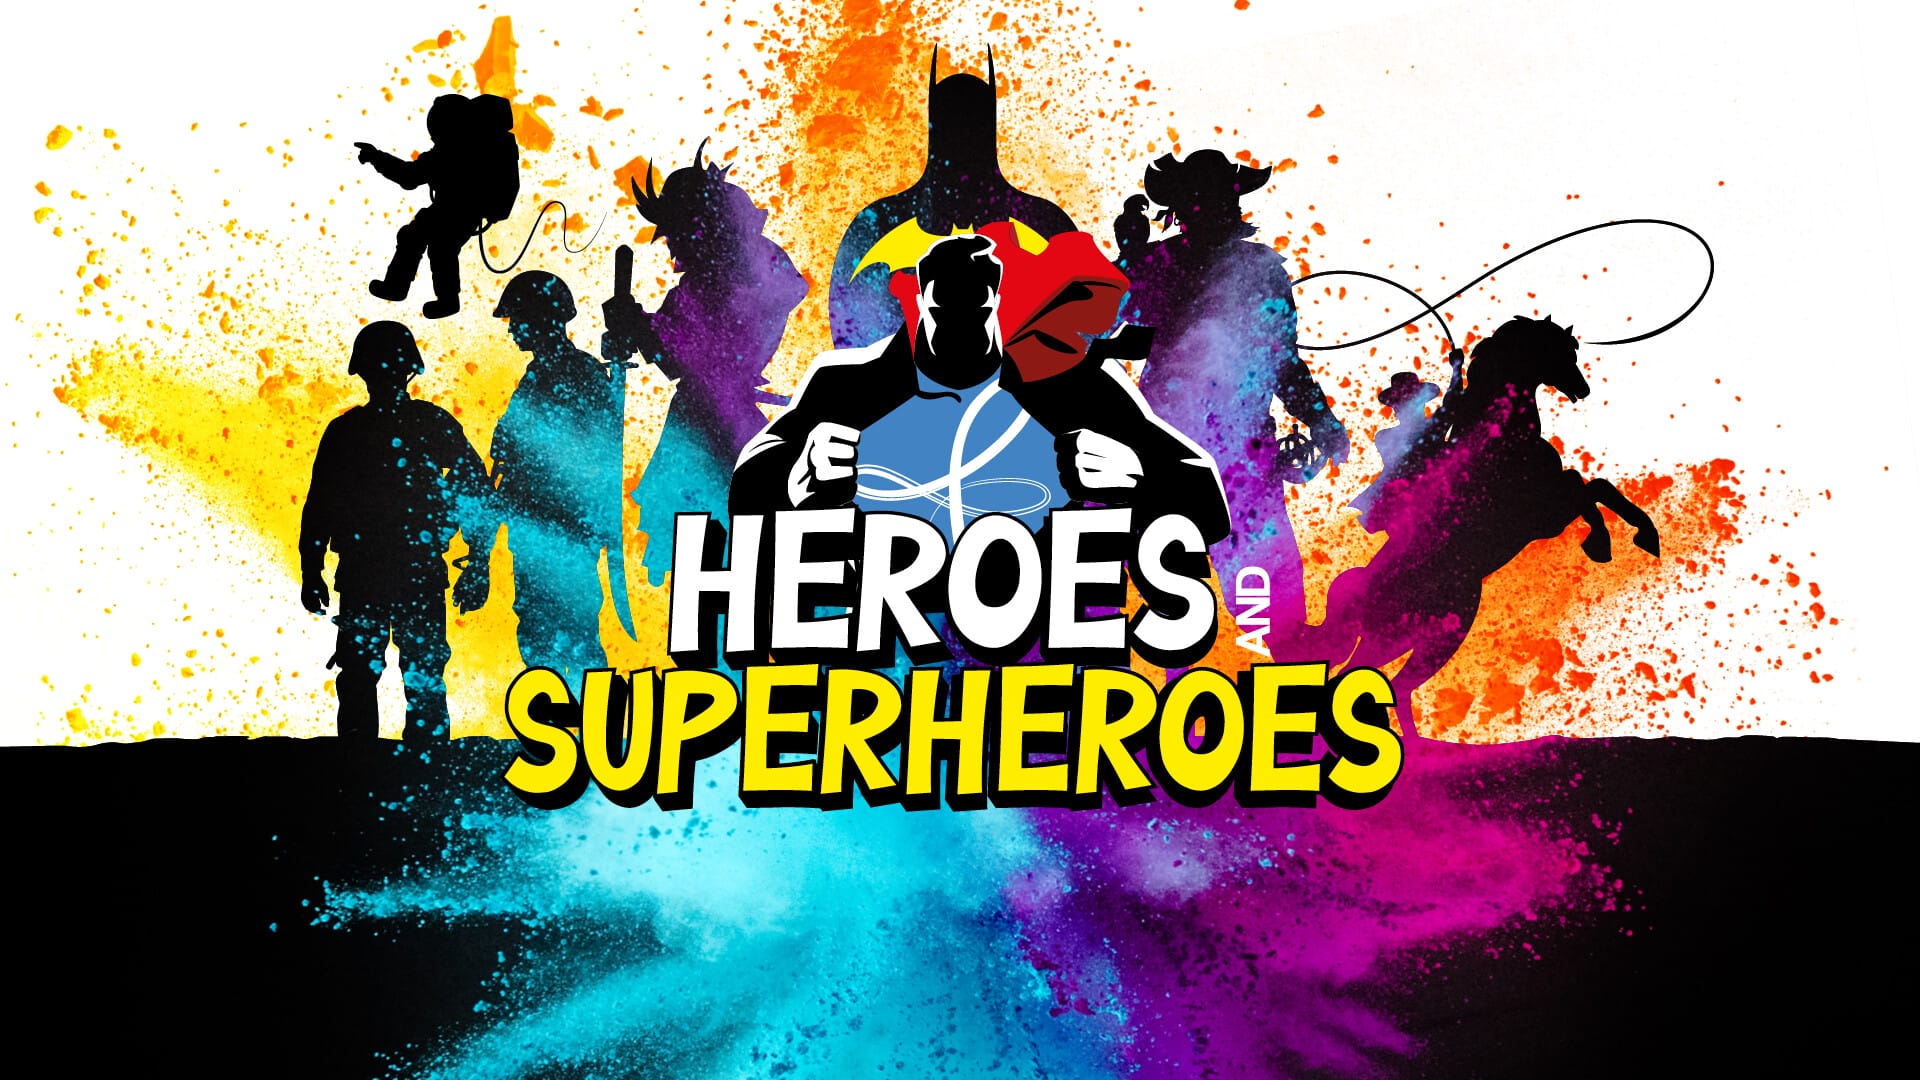 Heroes and Superheroes header image with silhouettes of spaceman, samurai, pirate, cowboy, US soldier and Superman